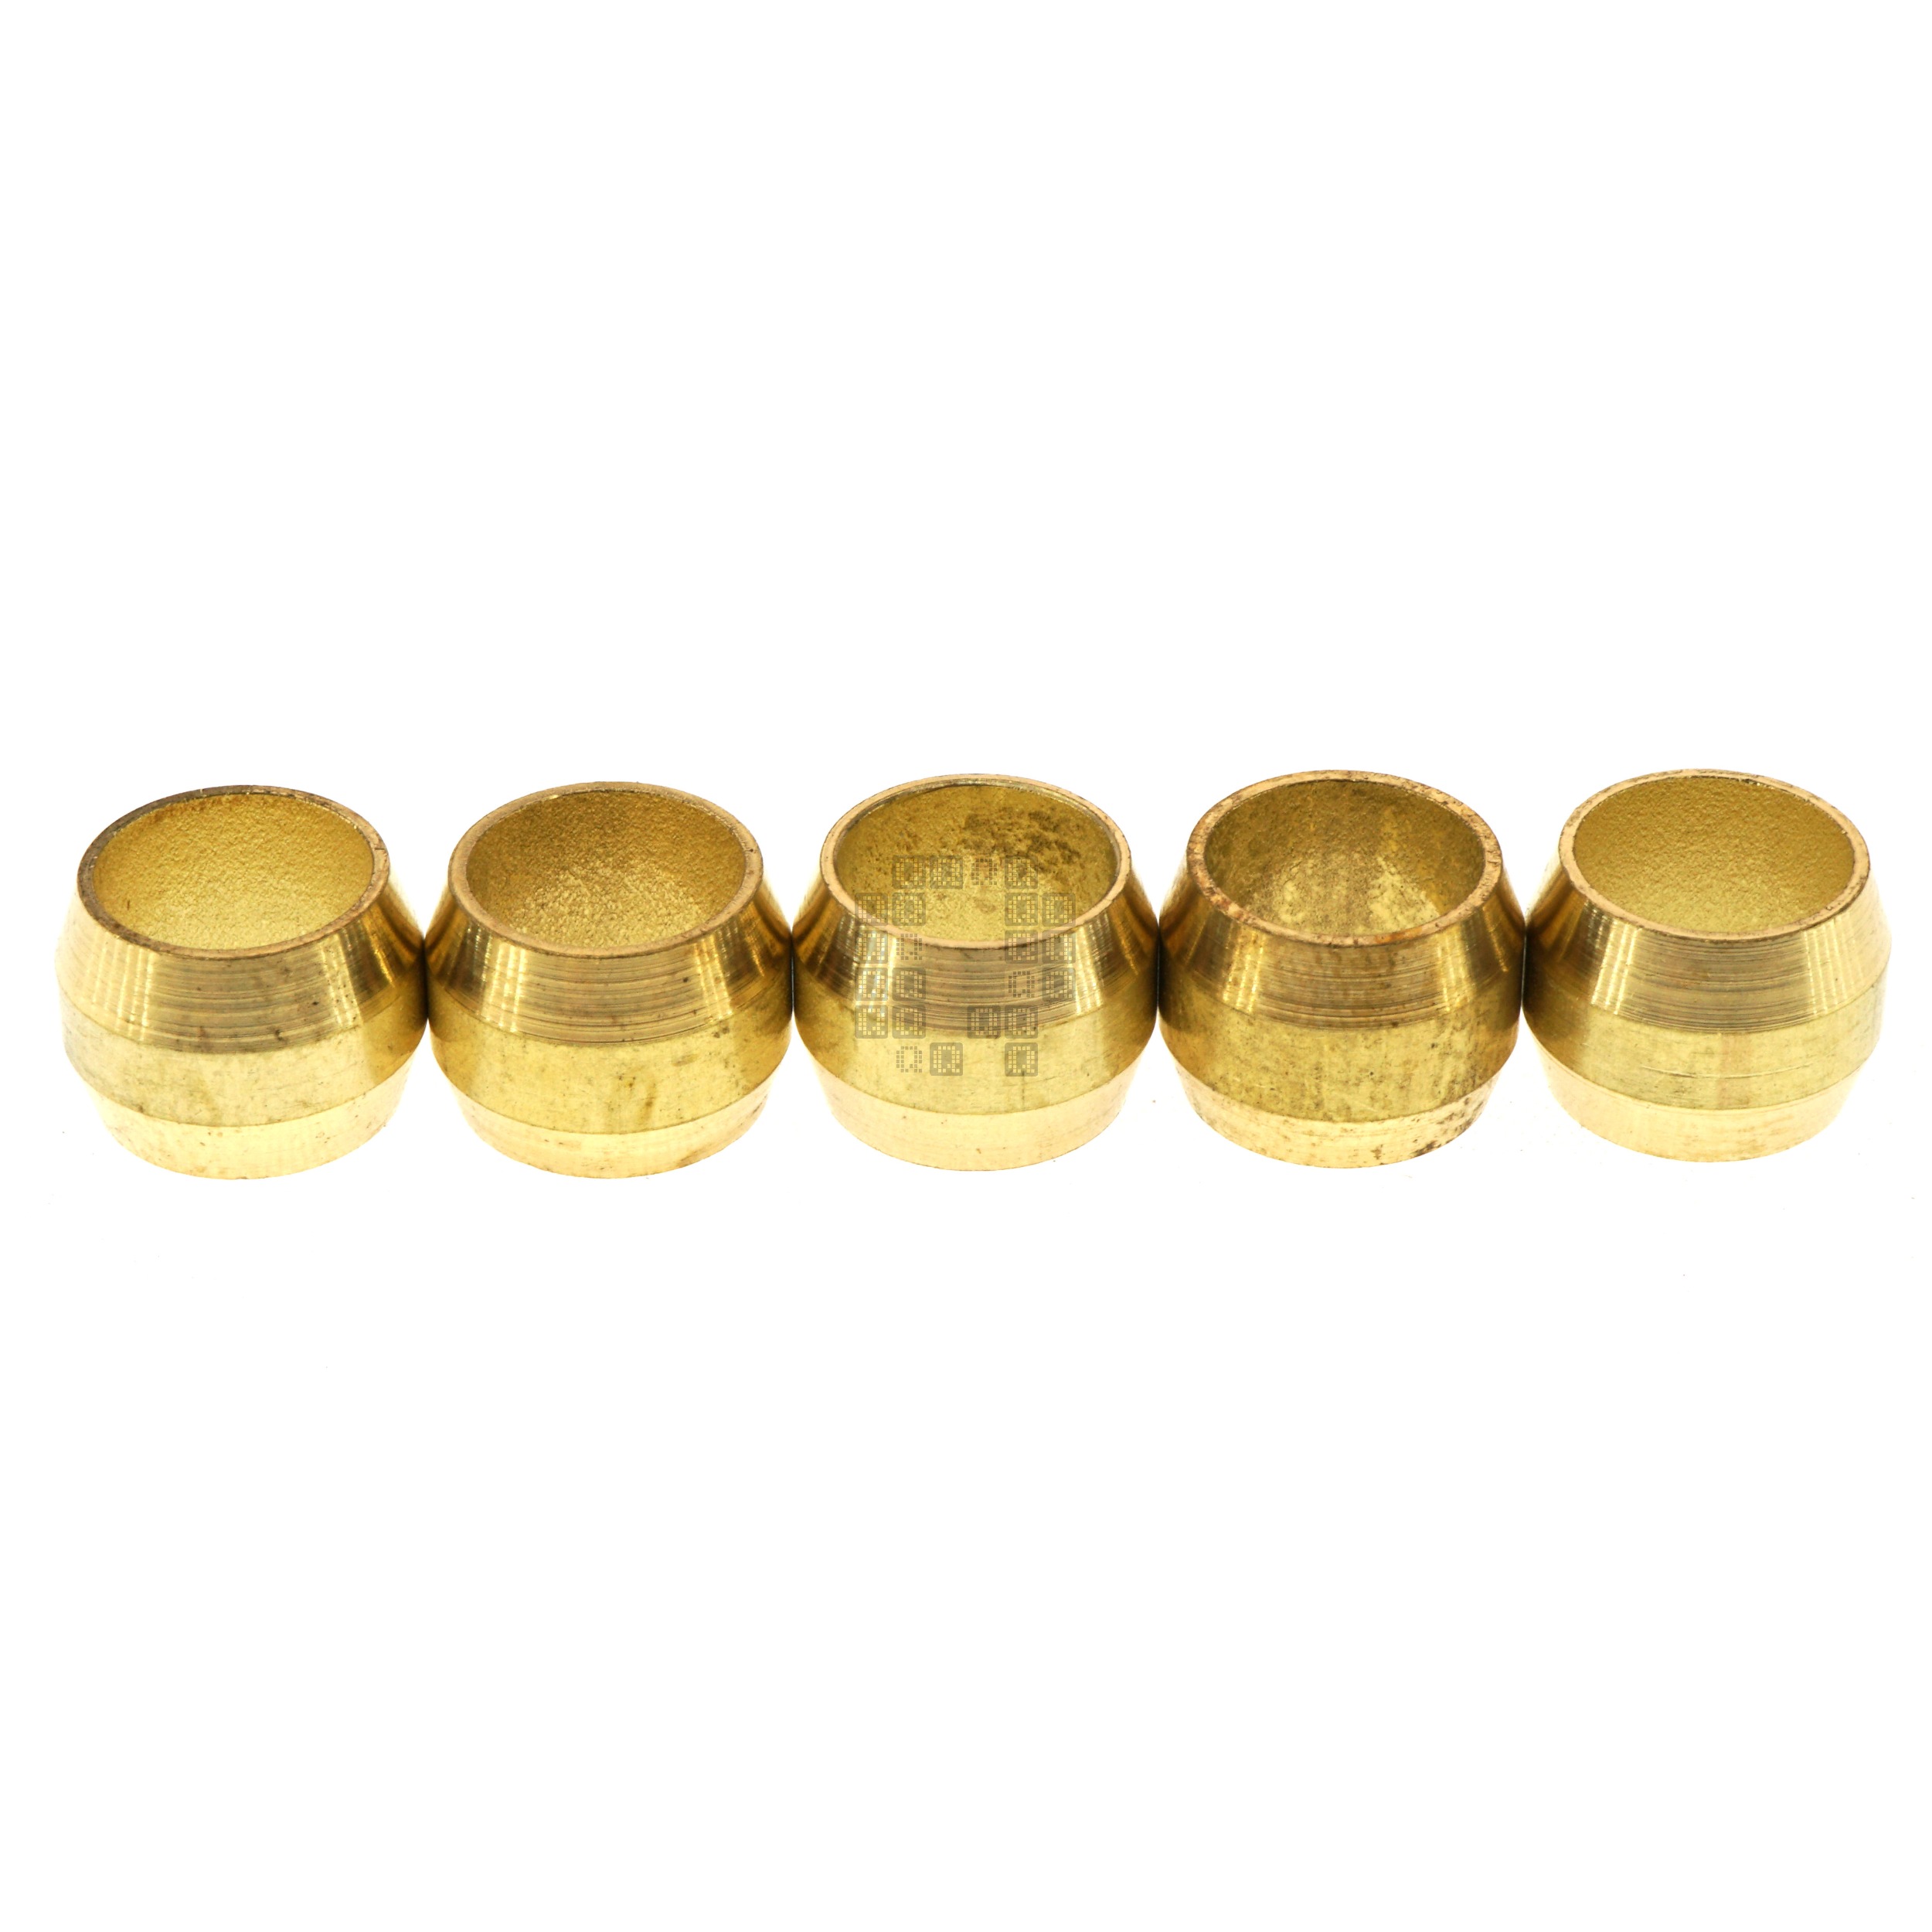 Anderson Metals 730060-04 1/4" Compression Pipe Sleeve, Brass, 5-Pack